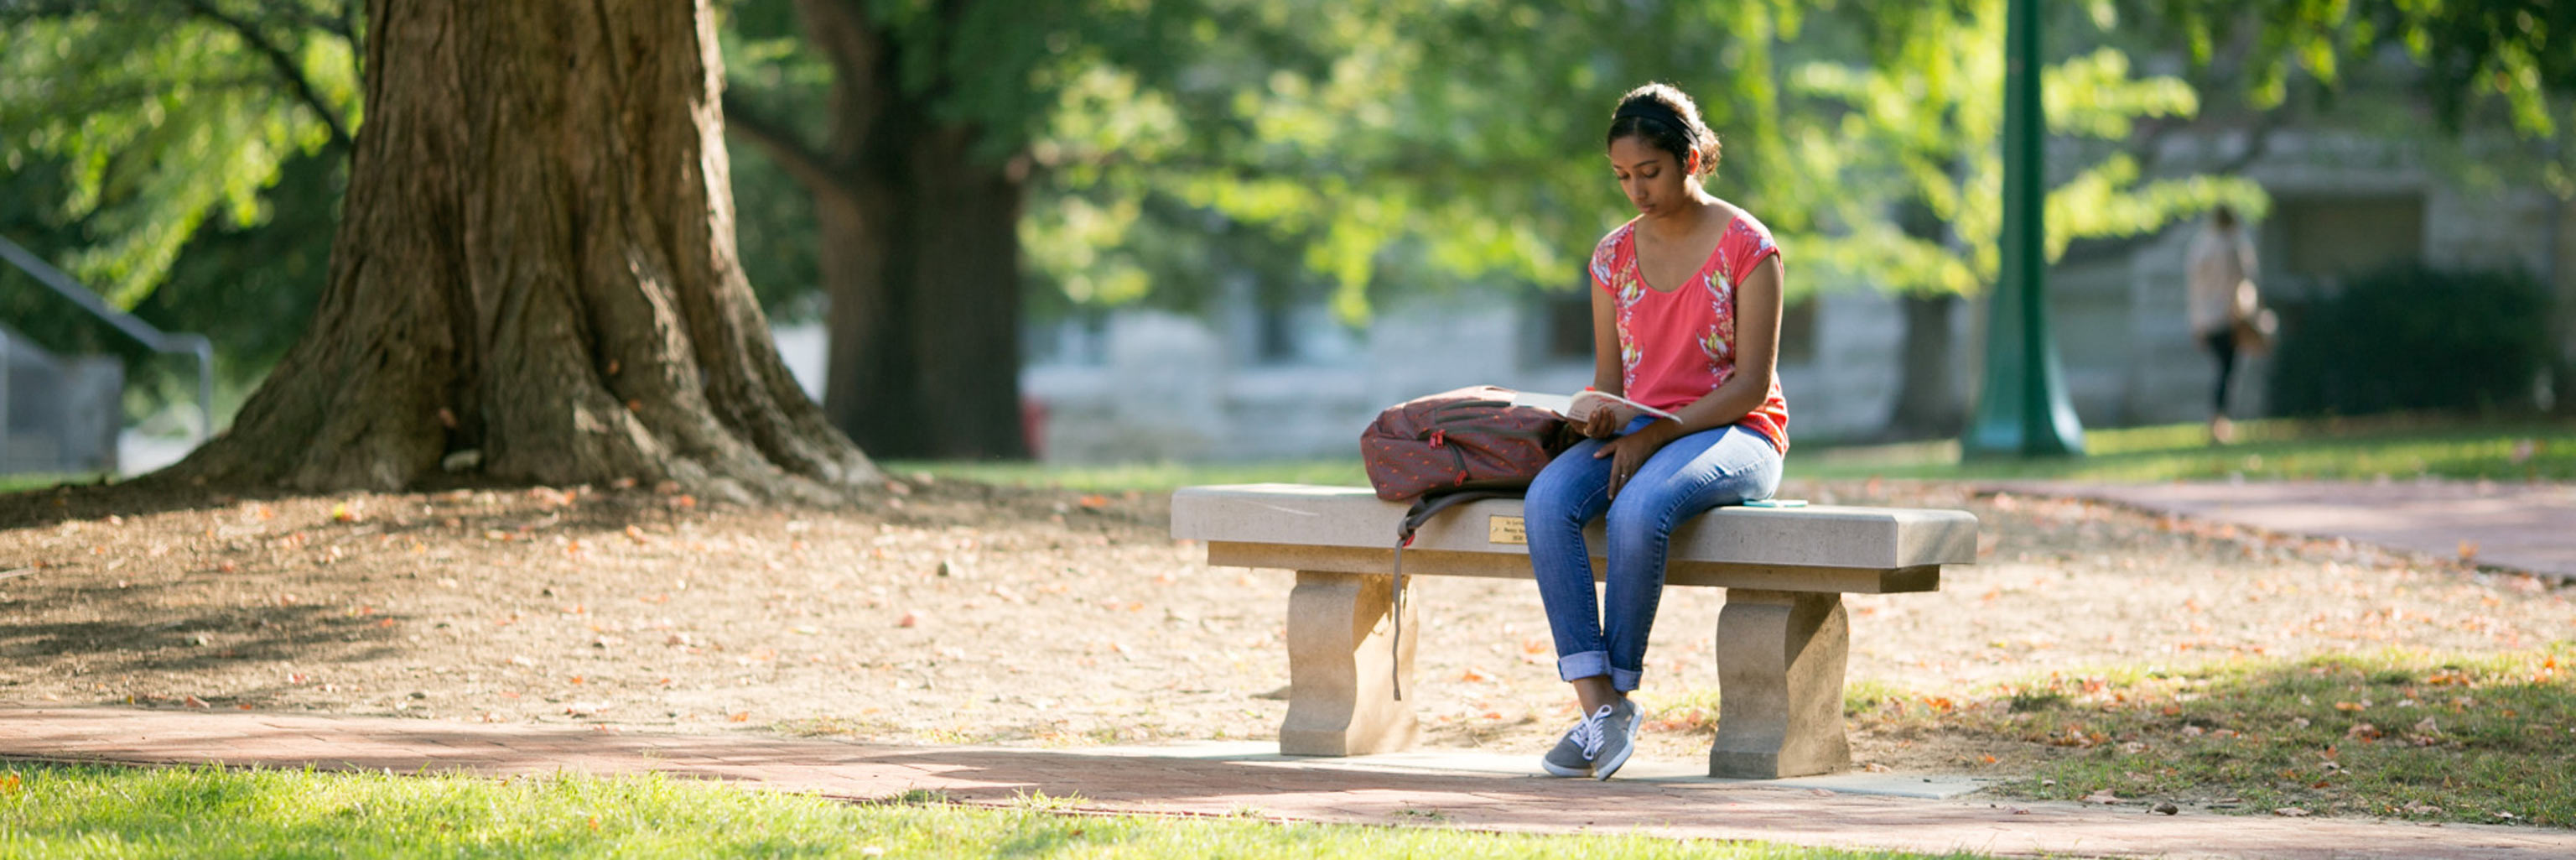 A girl sitting on a bench reading